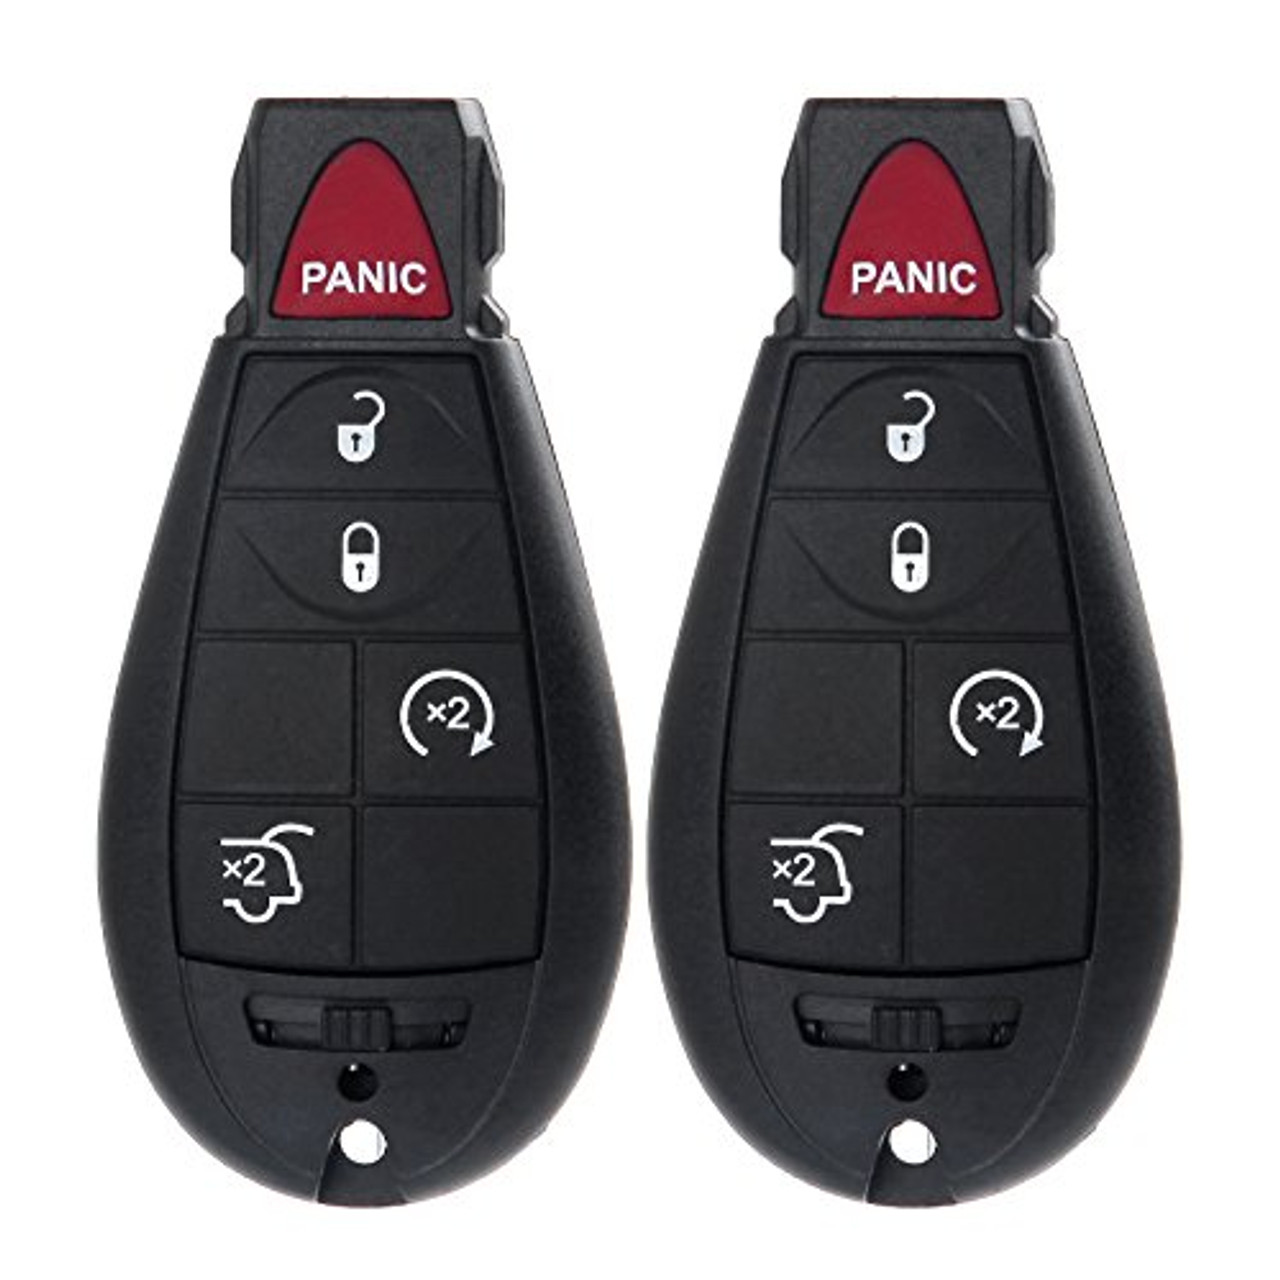 2x Remote Key Fob for Dodge Charger RAM Chrysler 300 Journey 3-Button IYZ-C01C 